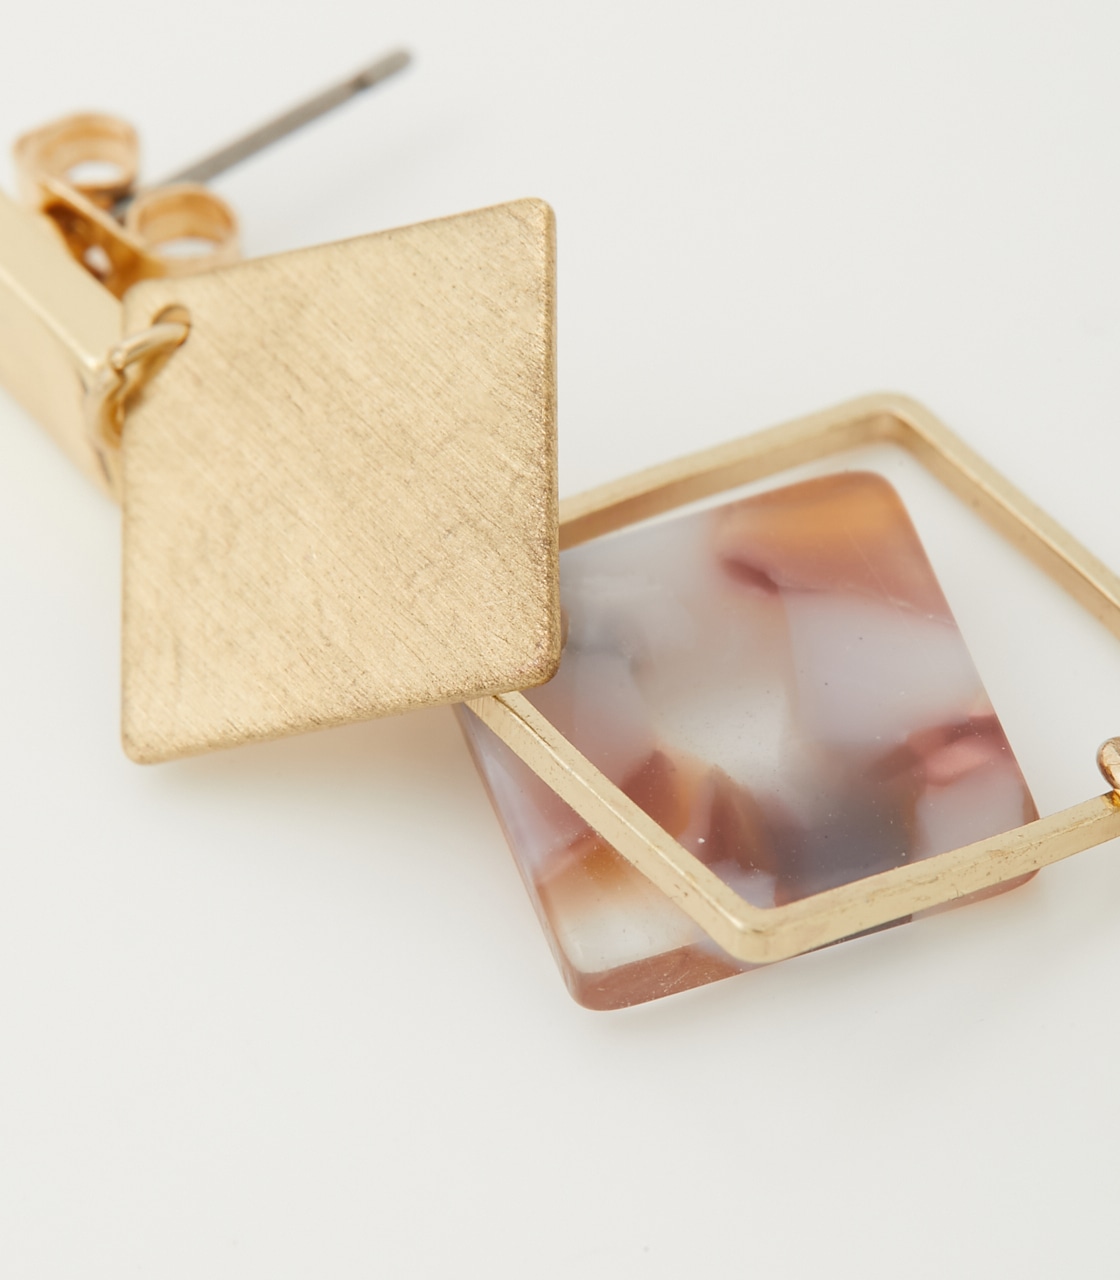 MARBLE×SQUARE METAL EARRINGS/MARBLE×SQUAREメタルピアス 詳細画像 柄BRN 5